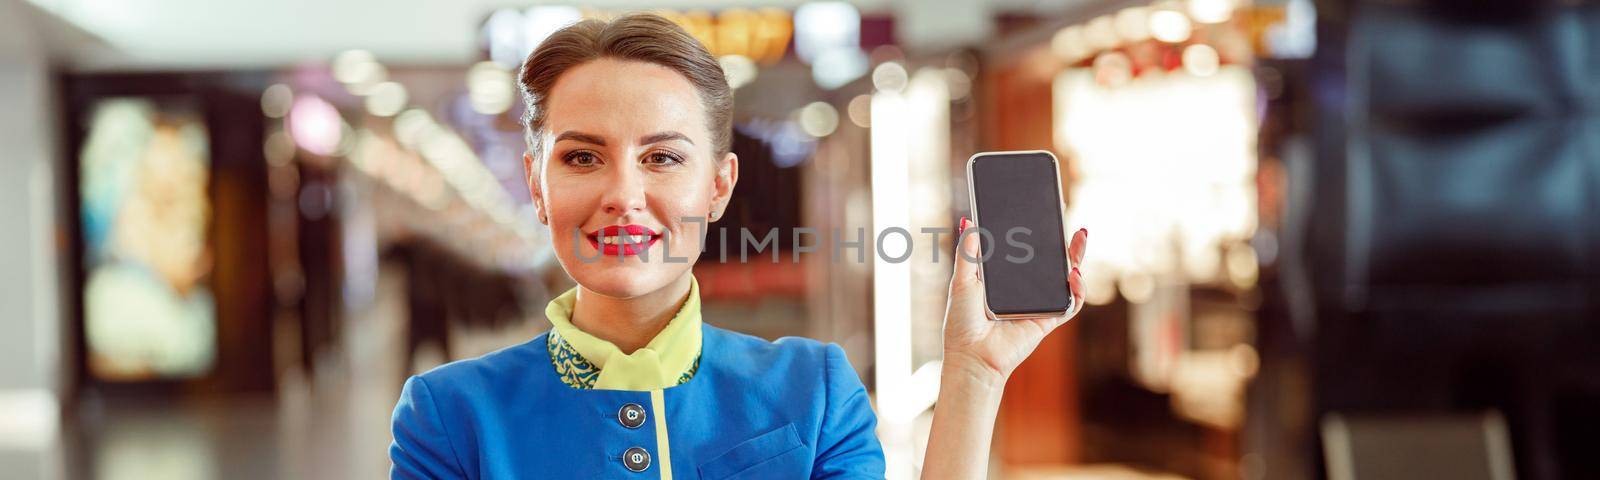 Joyful woman flight attendant in air hostess uniform looking at camera and smiling while holding modern smartphone